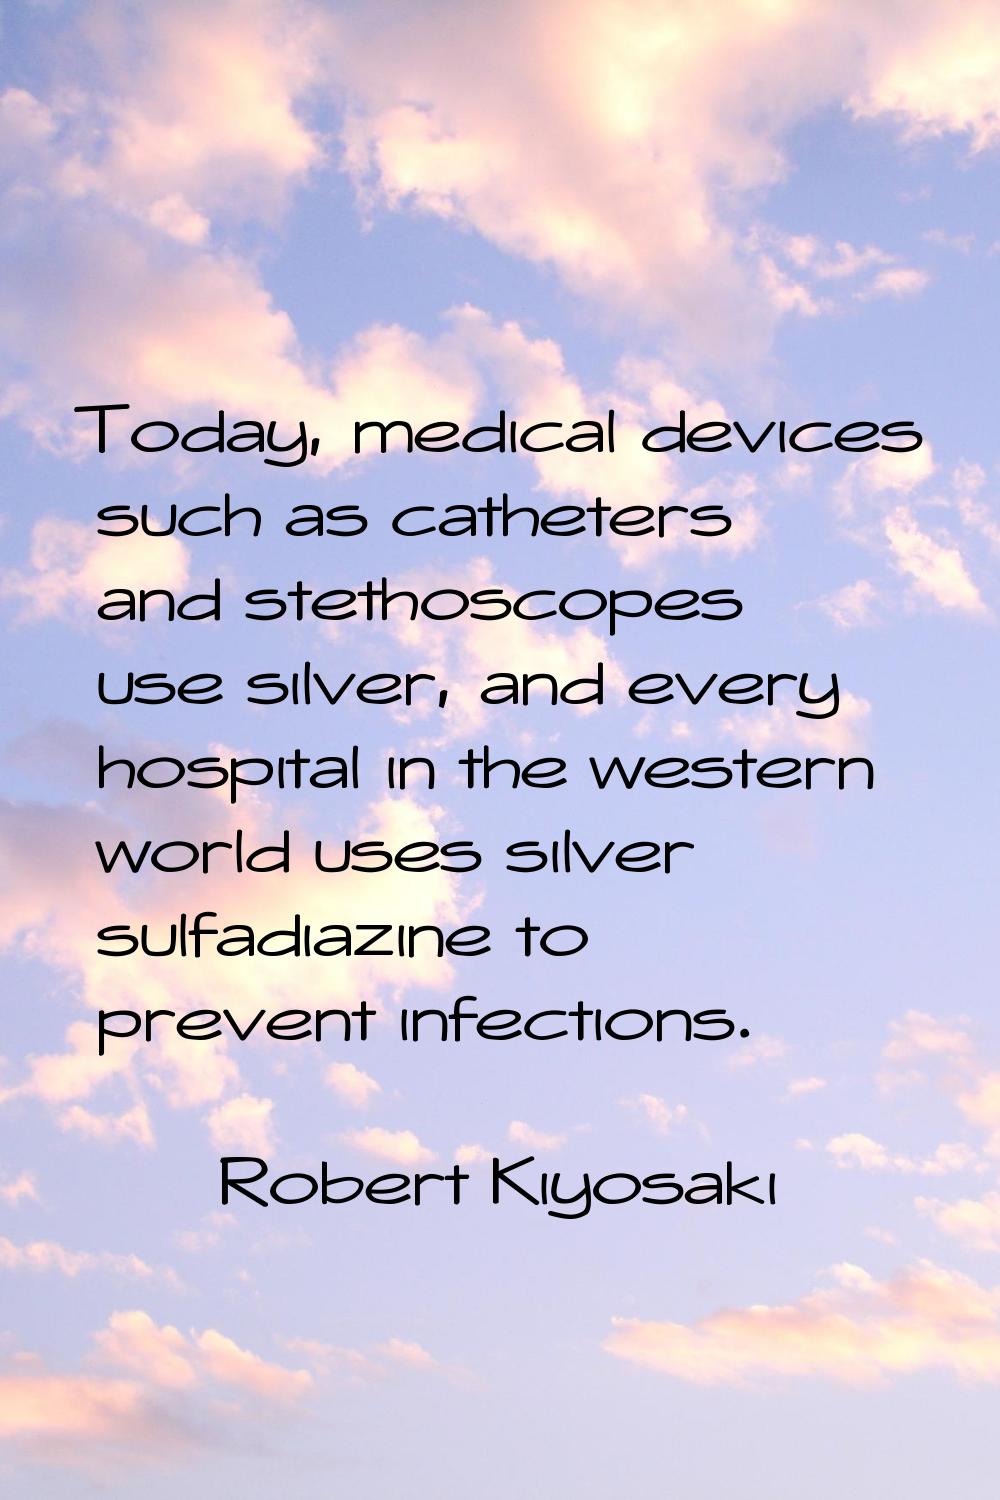 Today, medical devices such as catheters and stethoscopes use silver, and every hospital in the wes